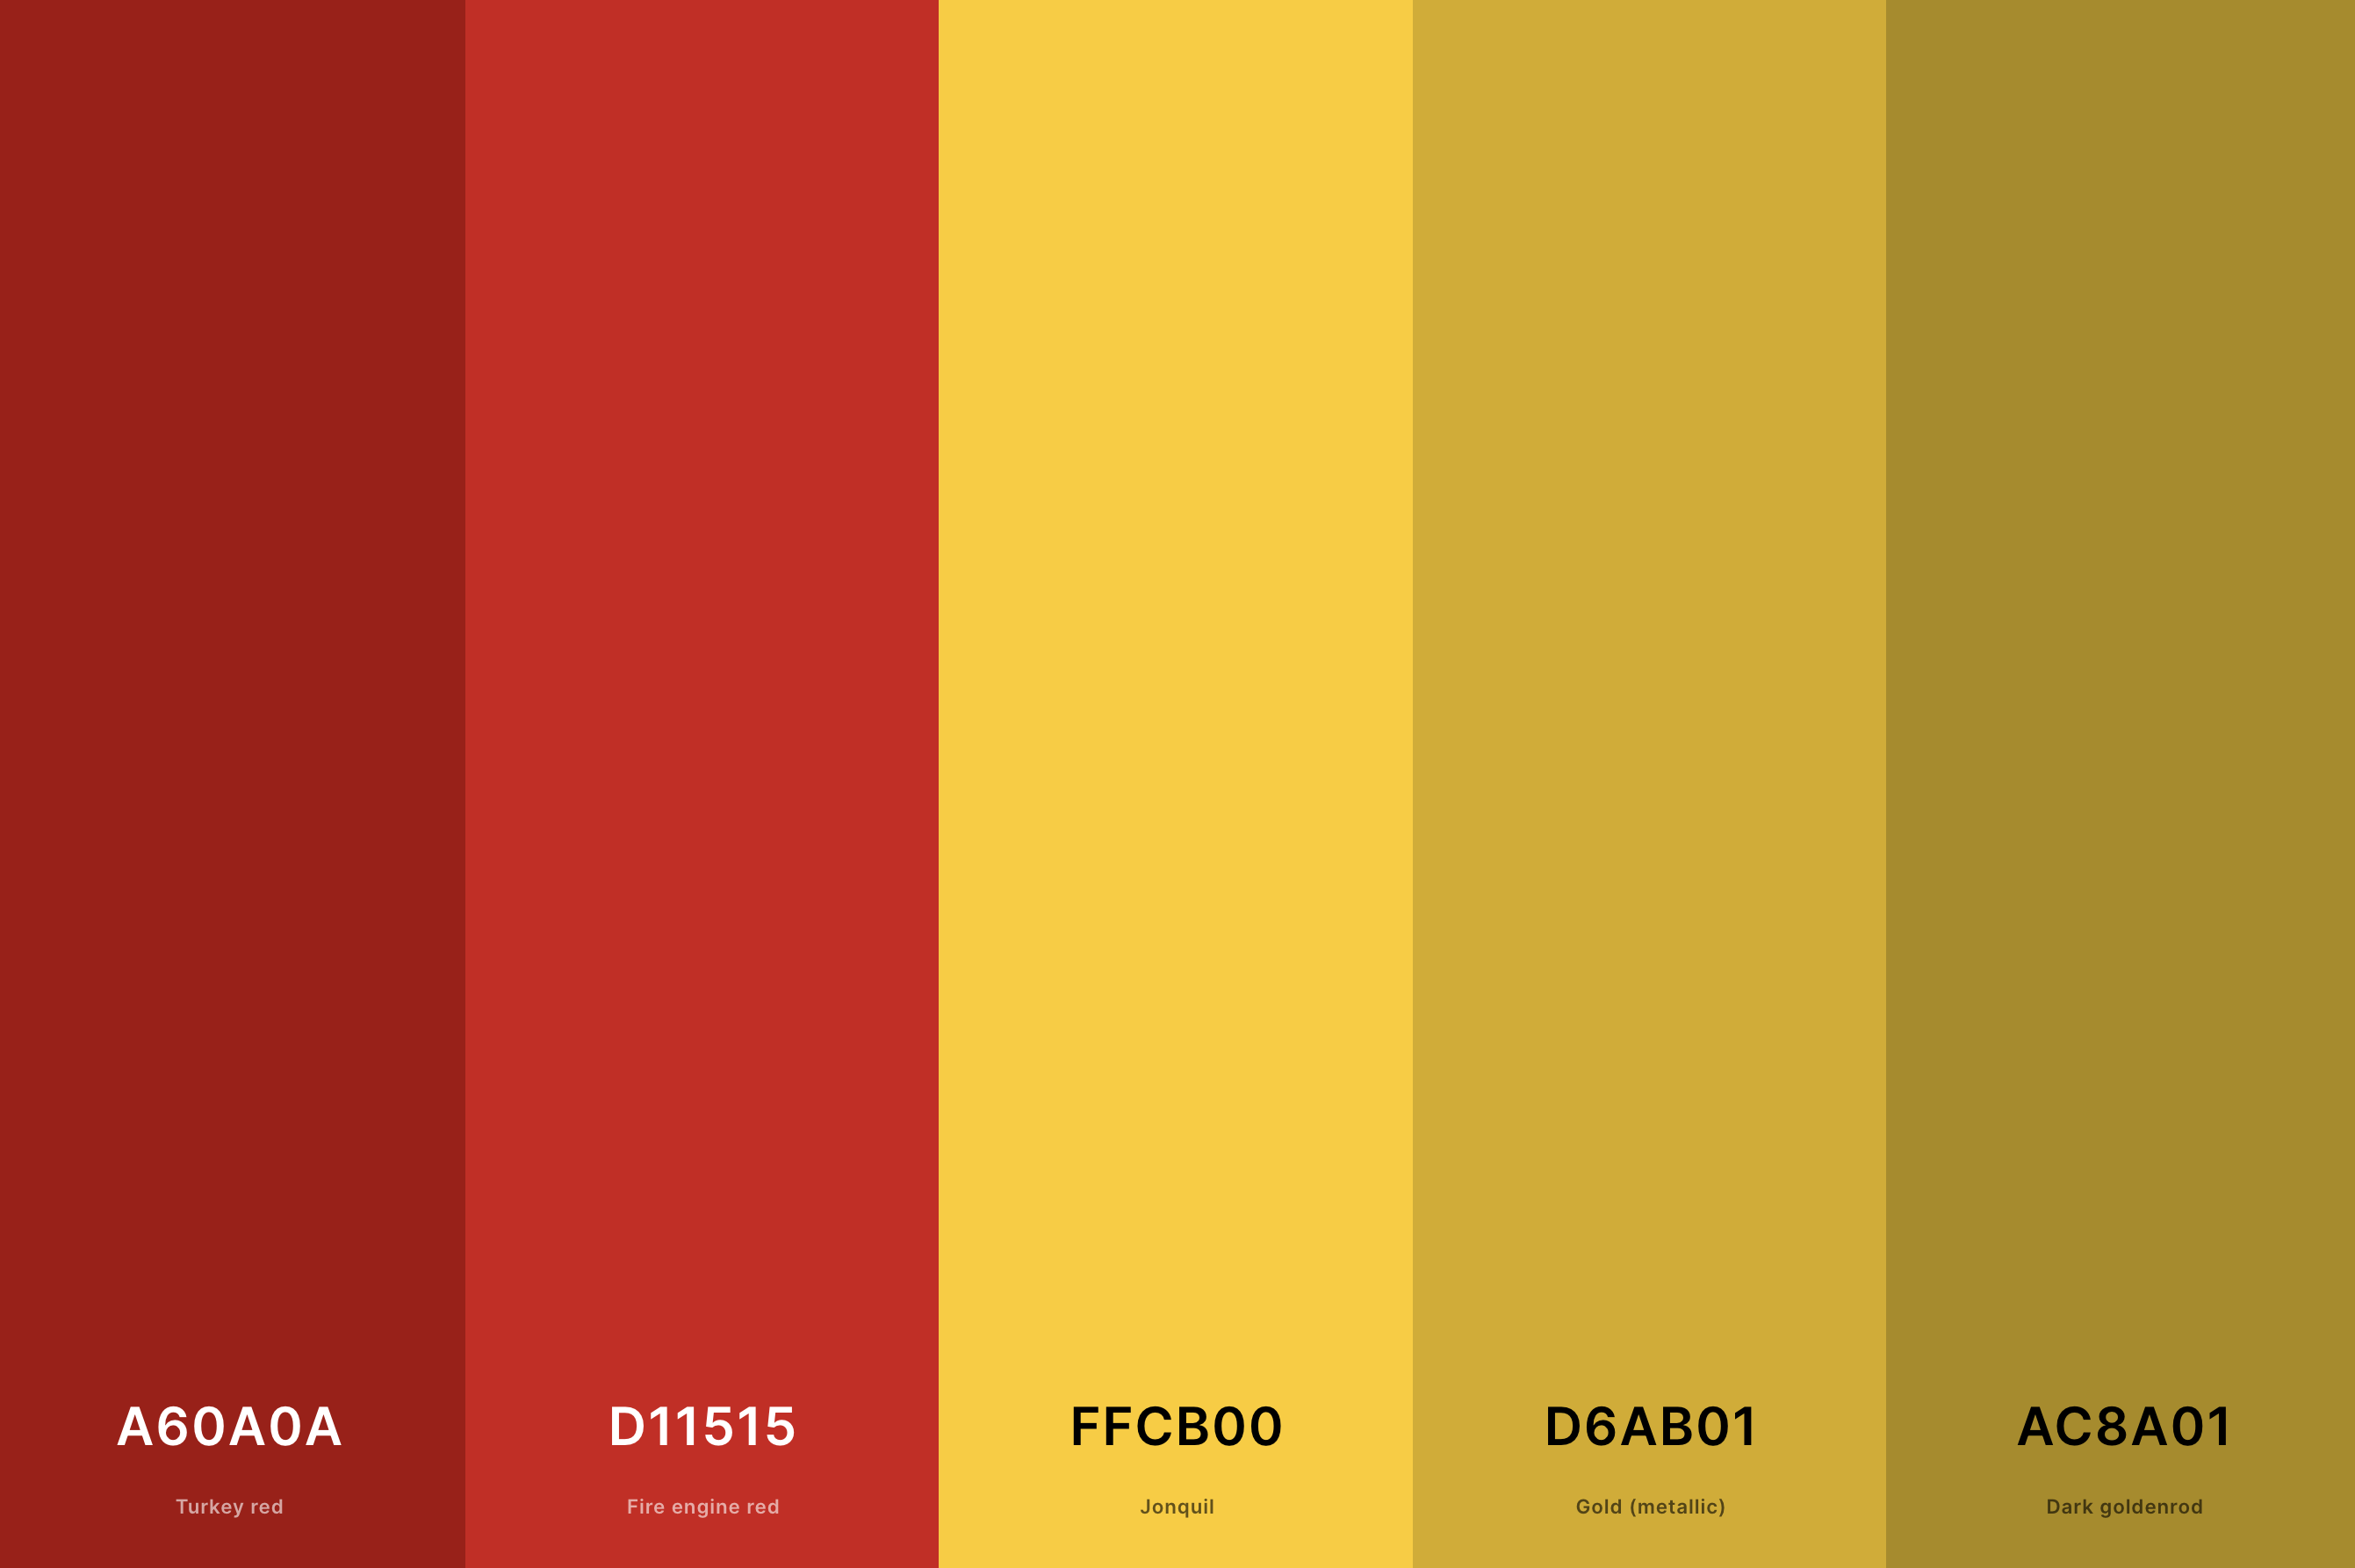 7. Red And Gold Color Palette Color Palette with Turkey Red (Hex #A60A0A) + Fire Engine Red (Hex #D11515) + Jonquil (Hex #FFCB00) + Gold (Metallic) (Hex #D6AB01) + Dark Goldenrod (Hex #AC8A01) Color Palette with Hex Codes